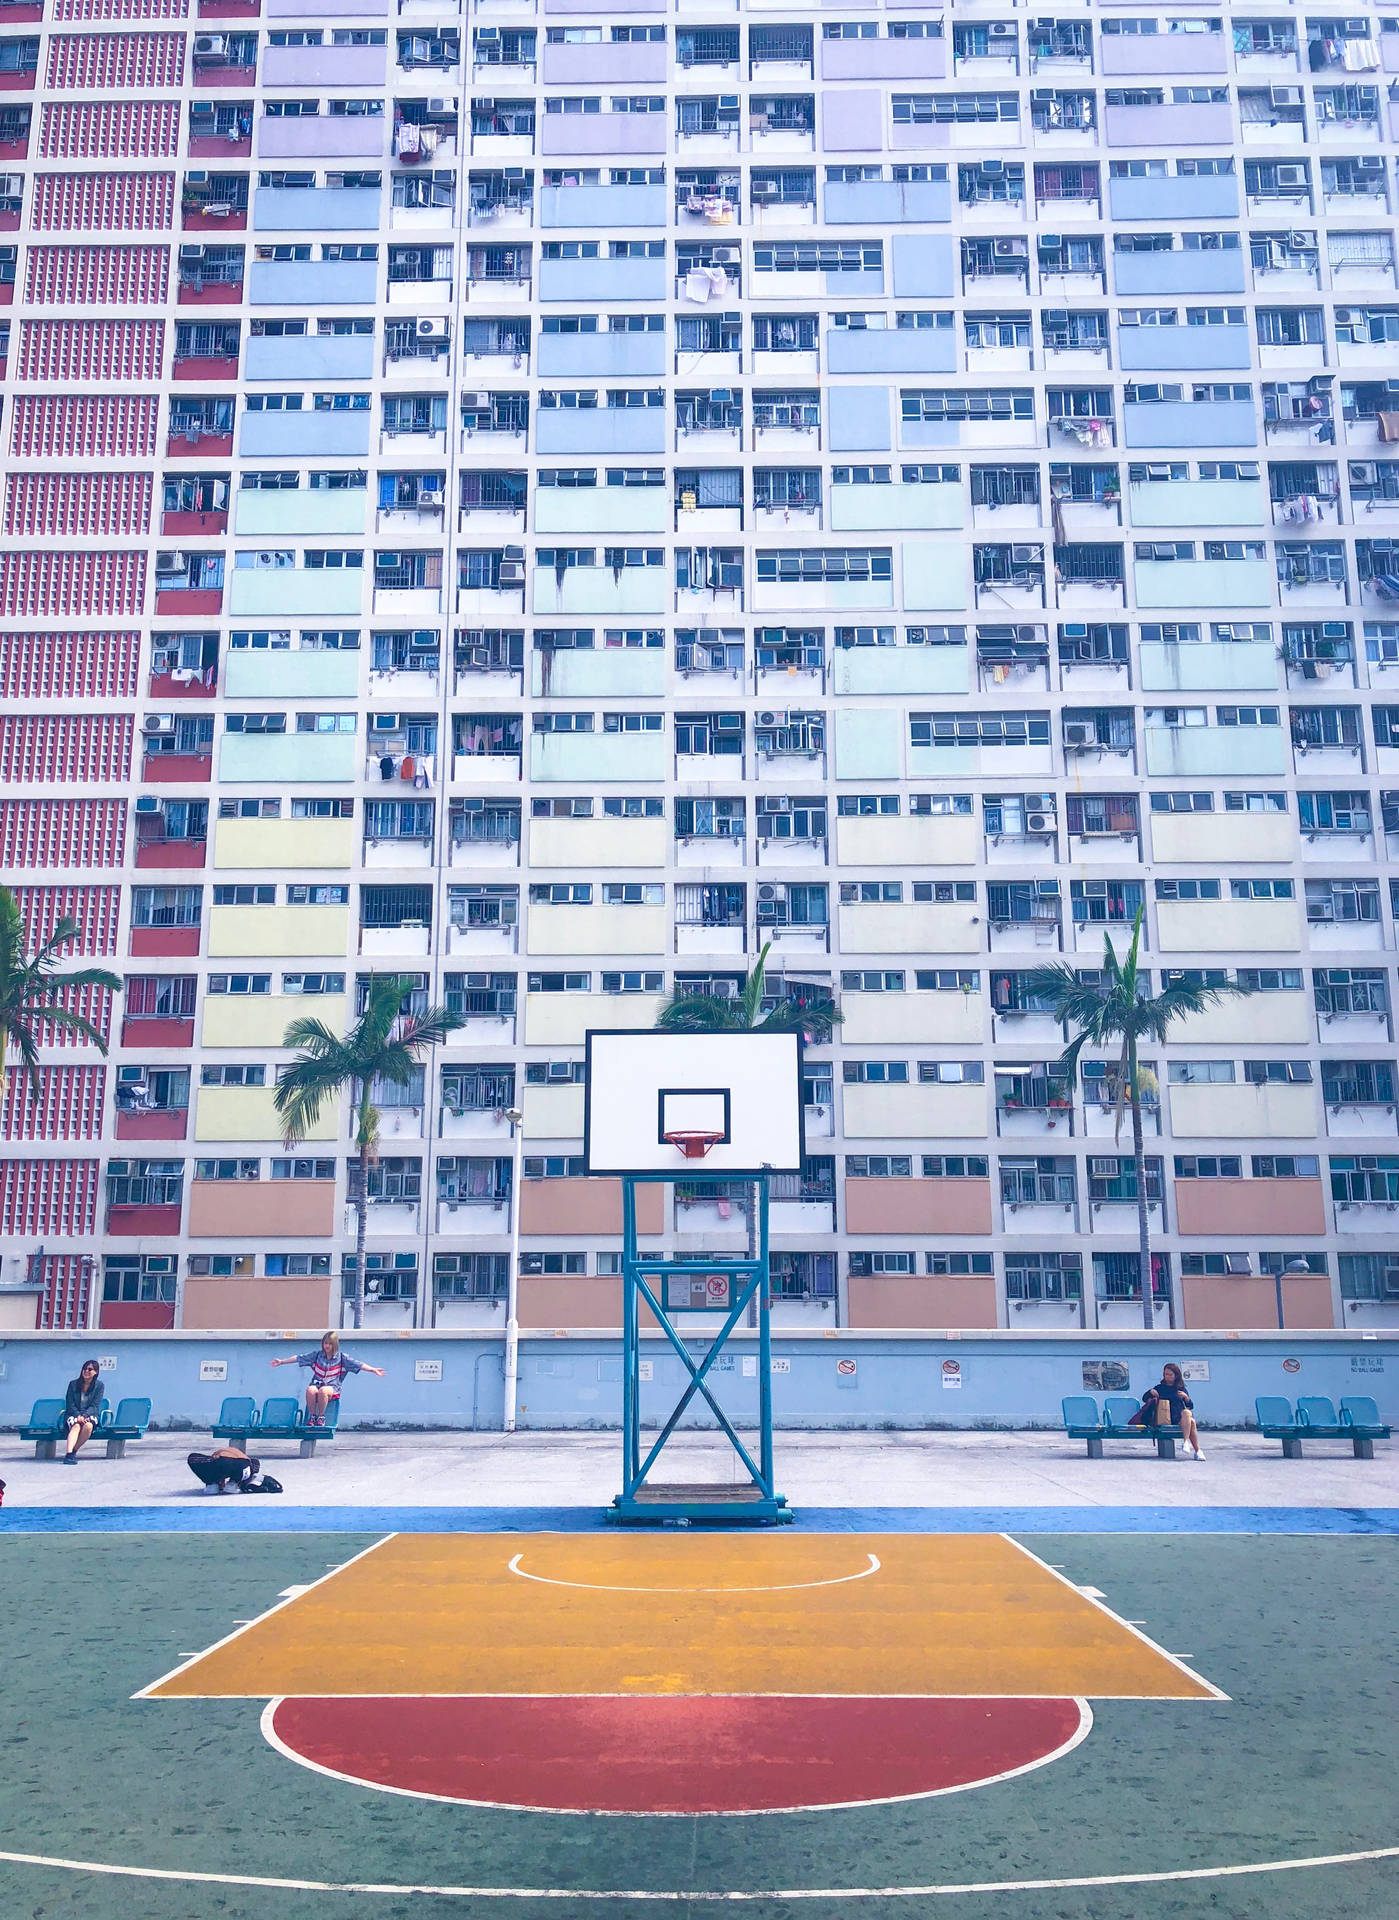 Dream Game Scene: Shooting A 3-pointer In Basketball On Iphone Wallpaper